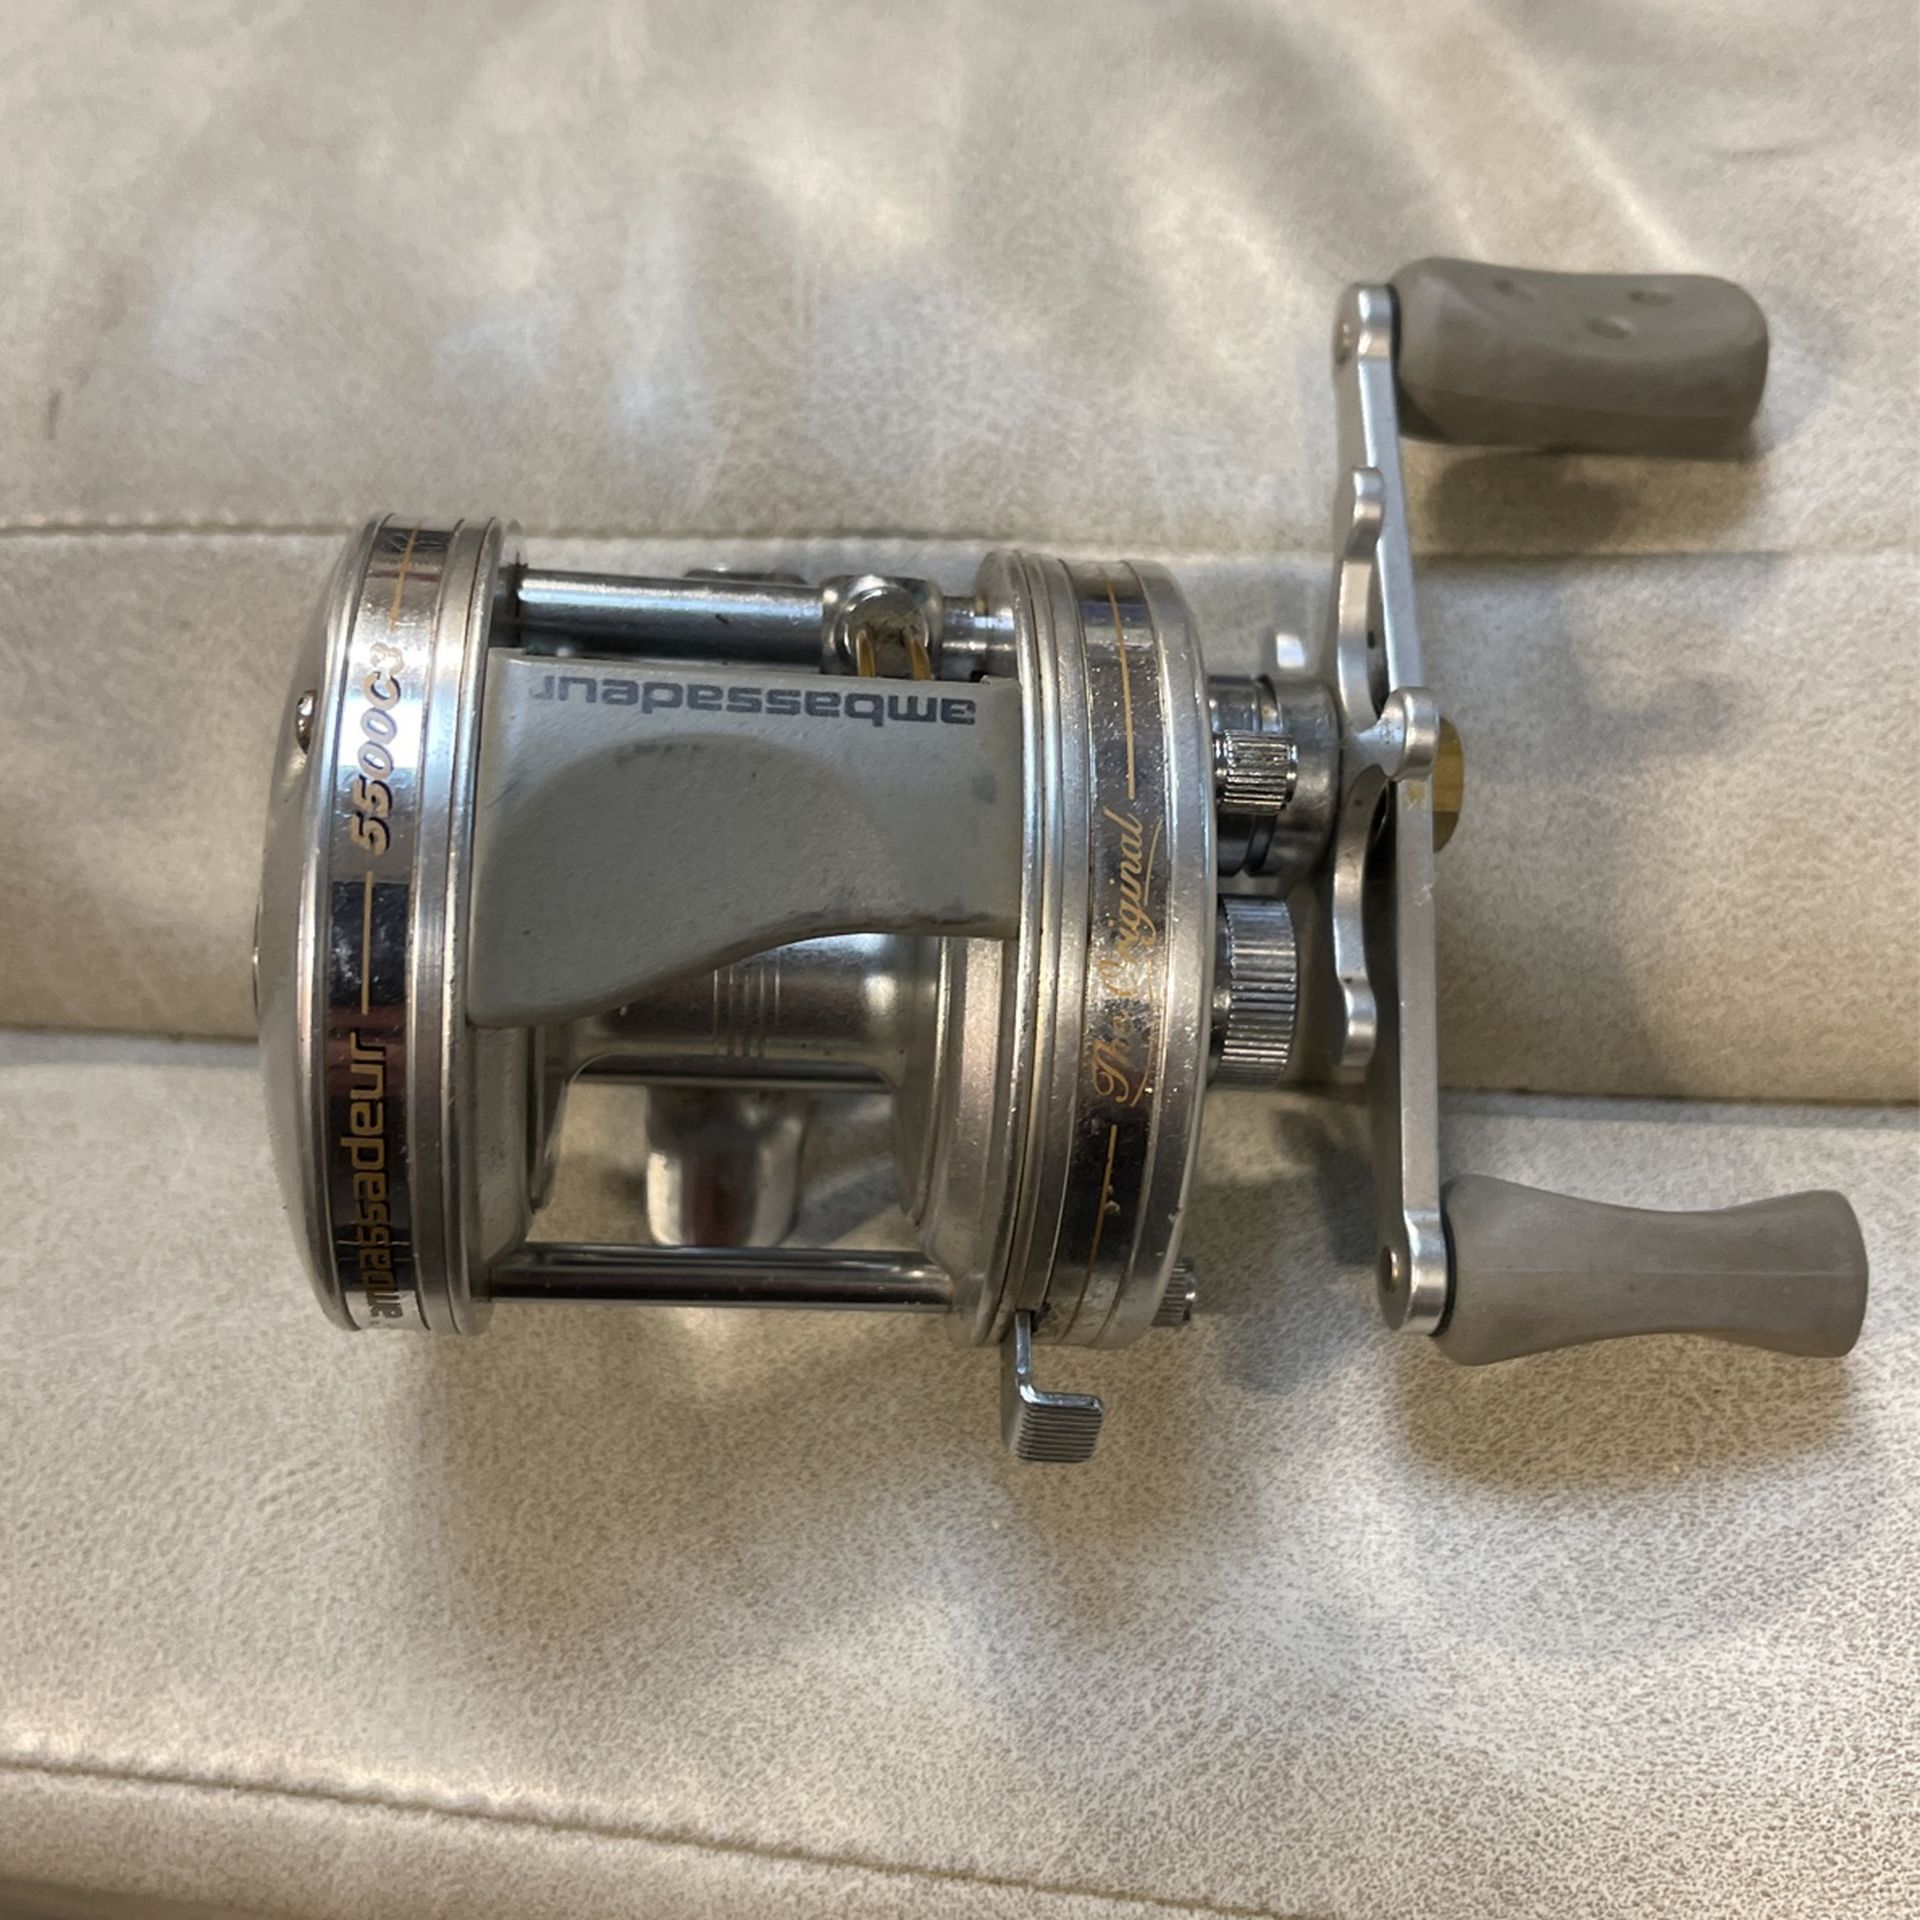 Three Abu Garcia Ambassador Reel's In Great Shape With Monofilament Line  for Sale in Vancouver, WA - OfferUp